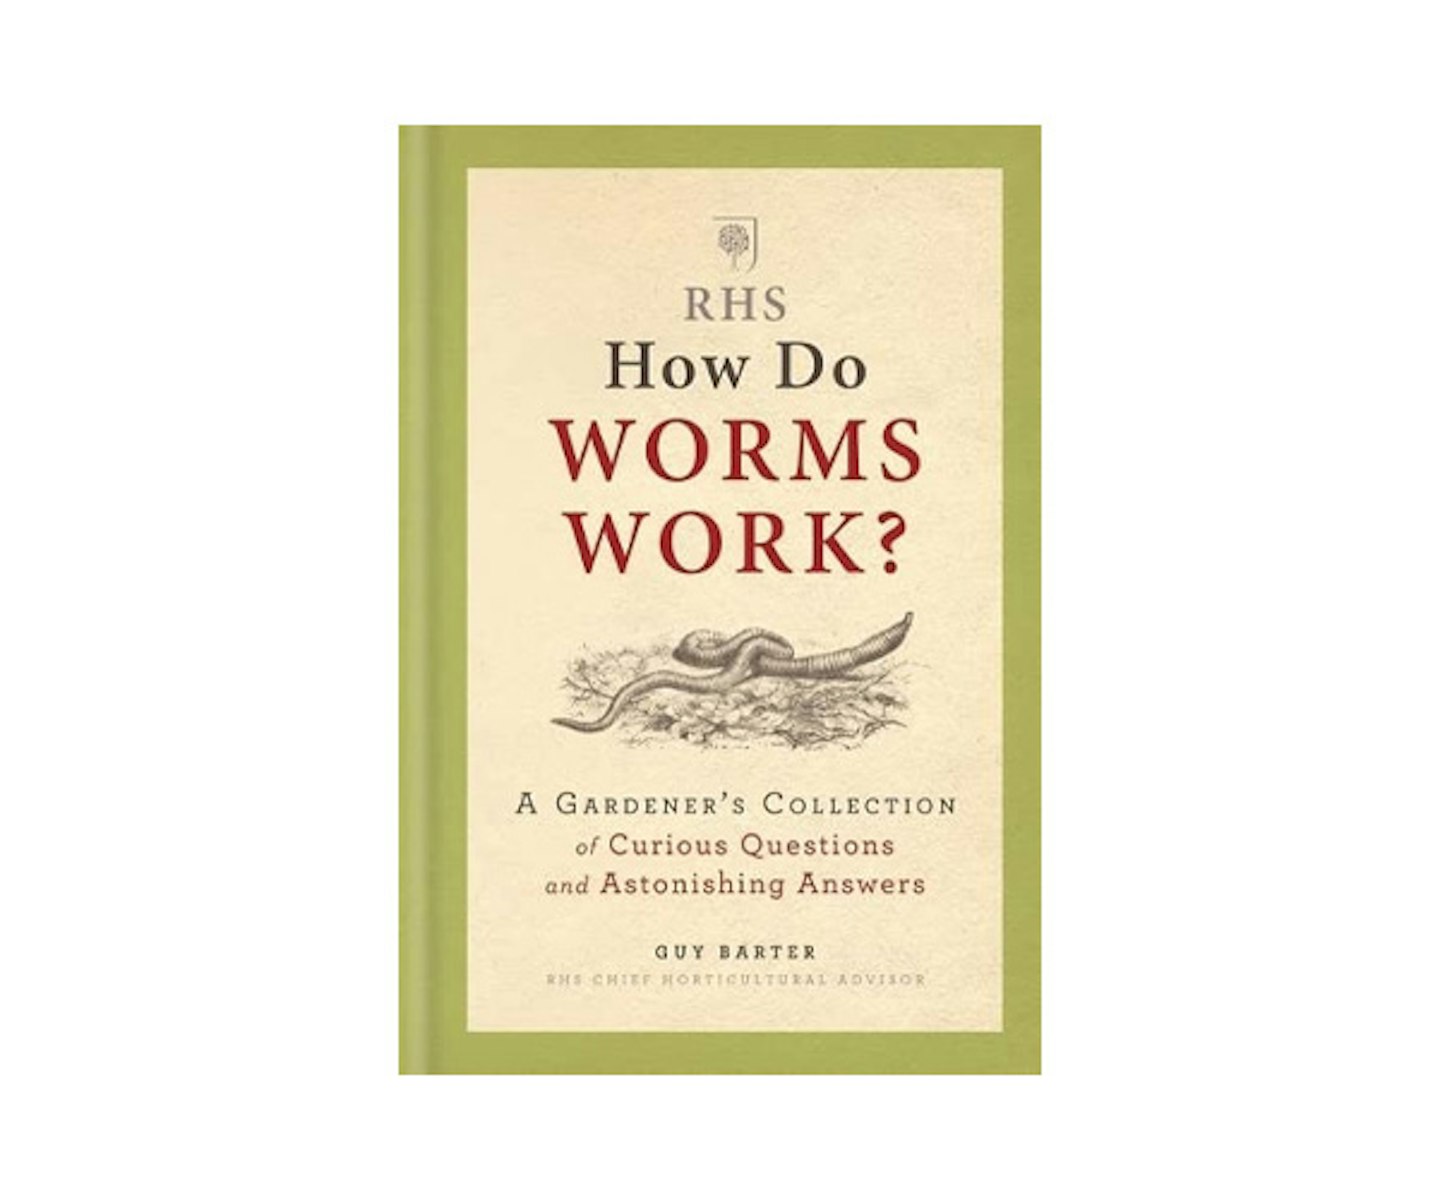 RHS How Do Worms Work